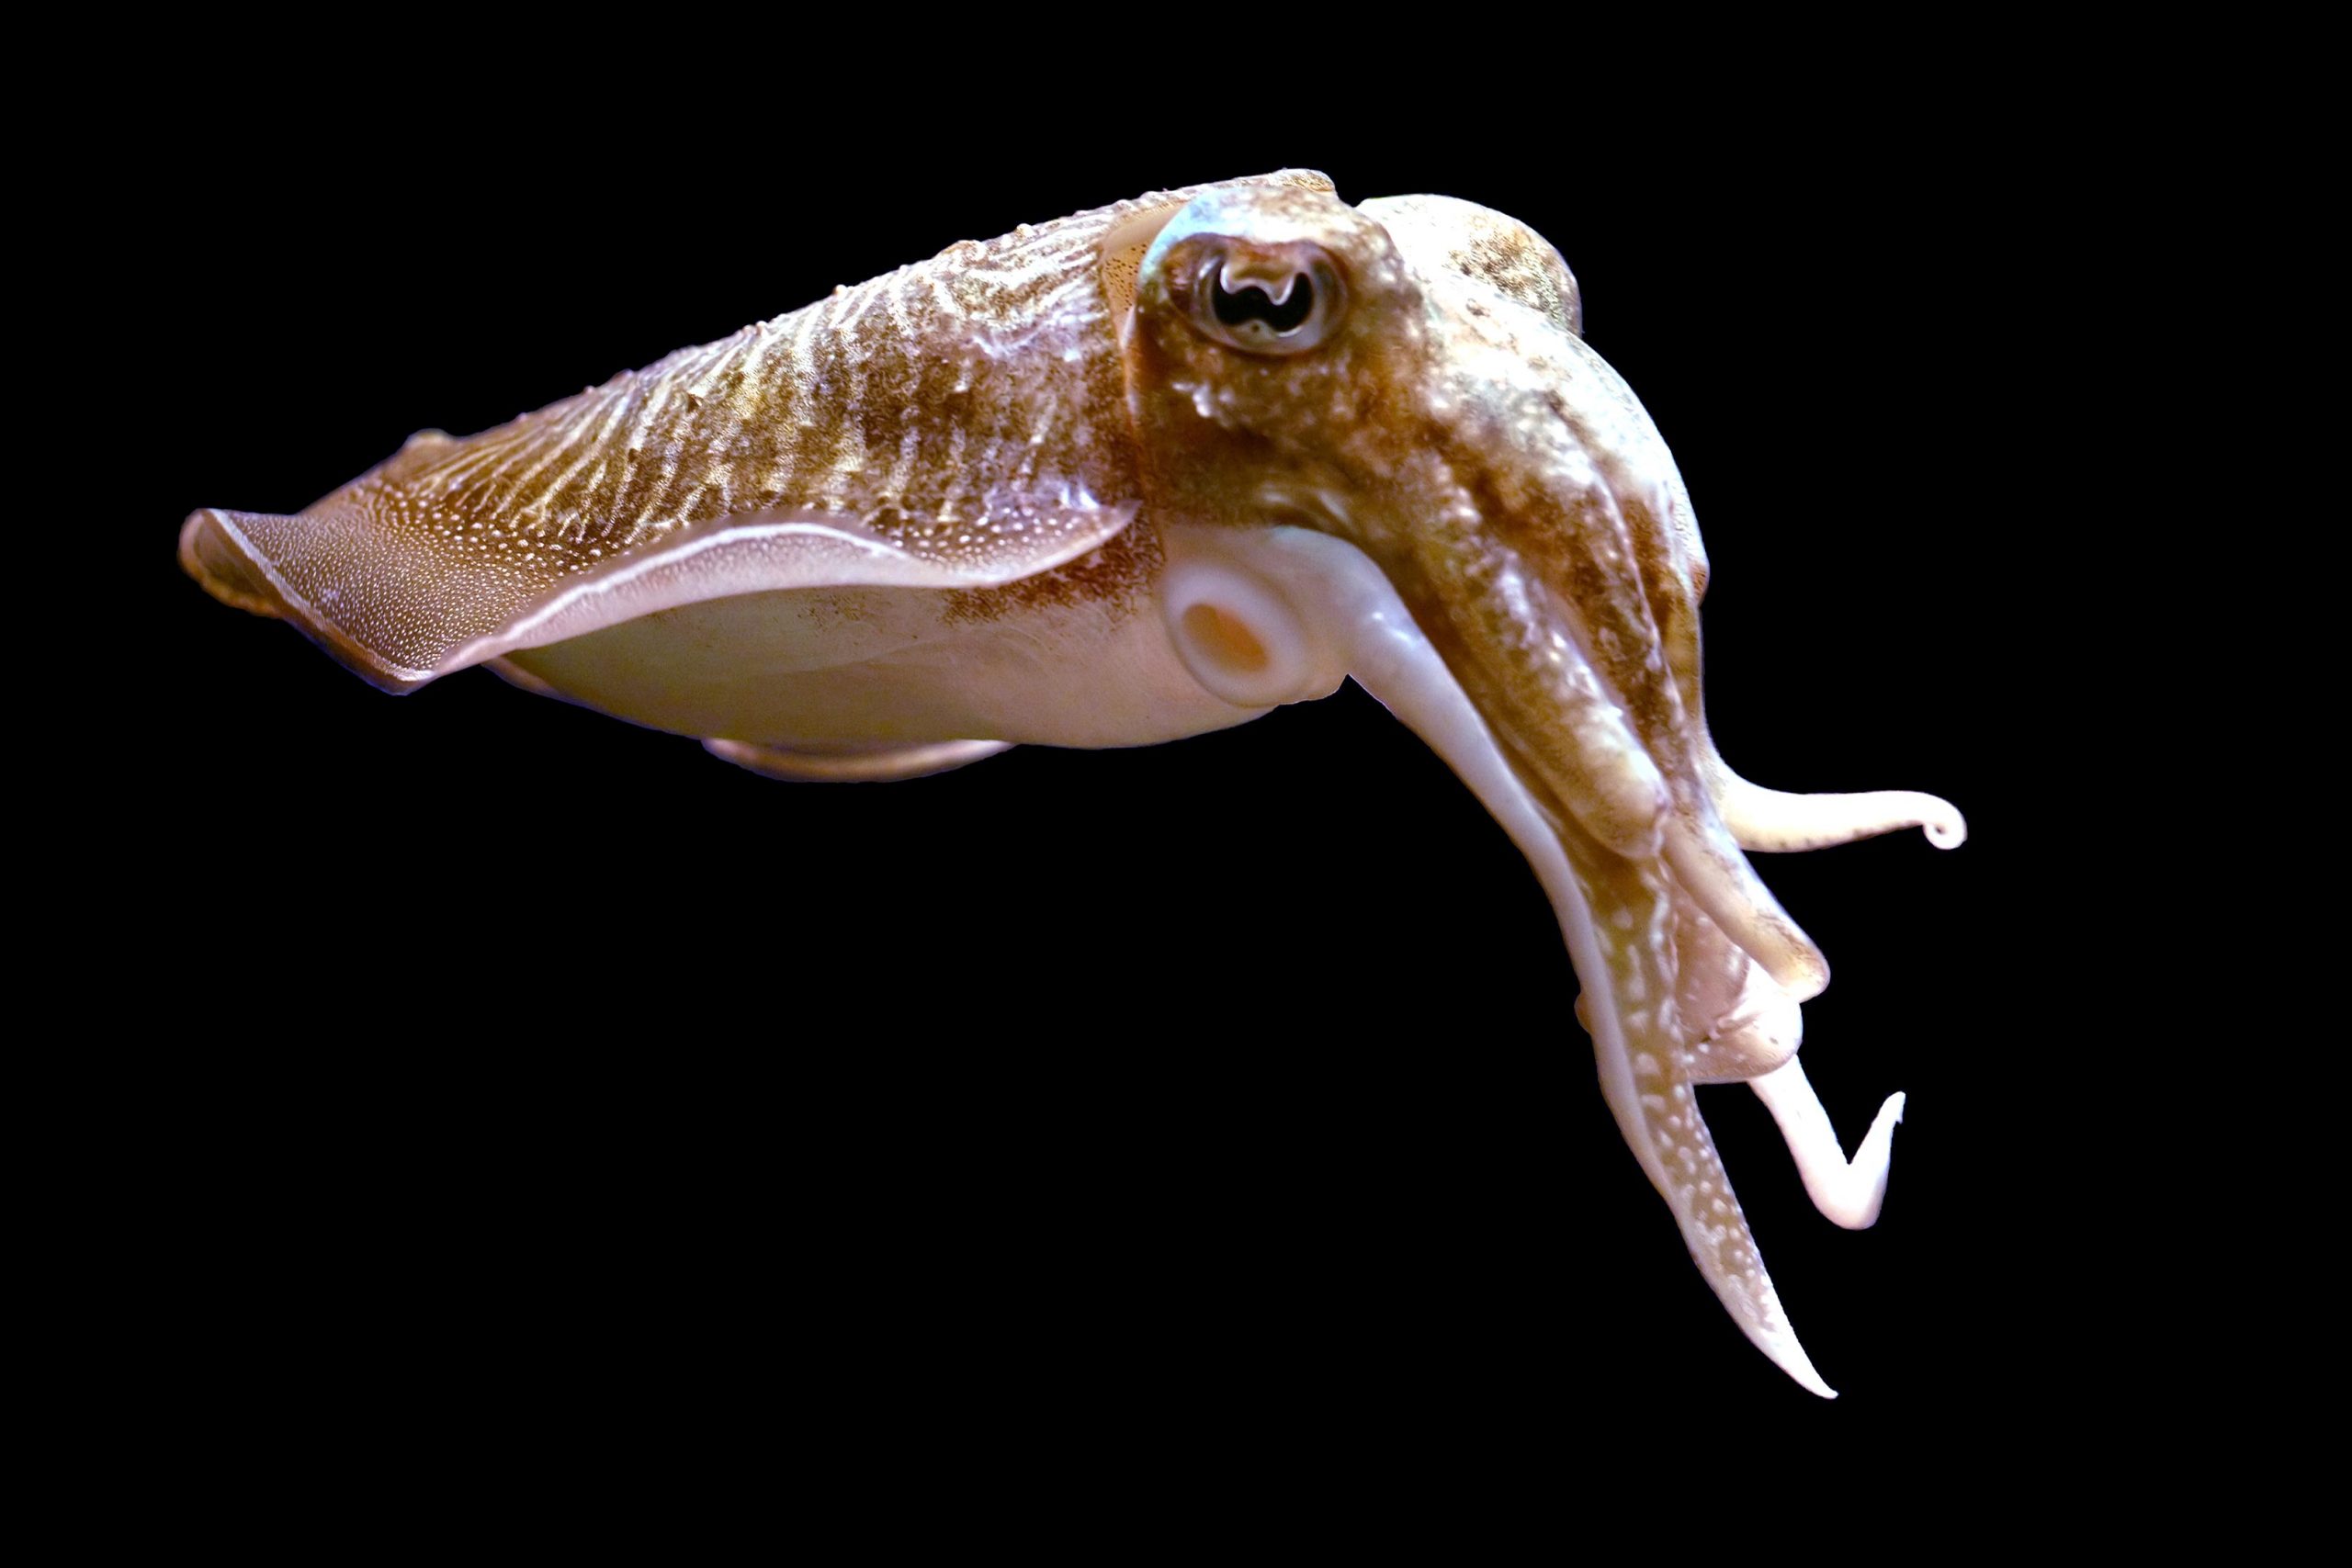 Cuttlefish can remember what, where, and when specific events happened – right up to their last few days of life, researchers have found. The re